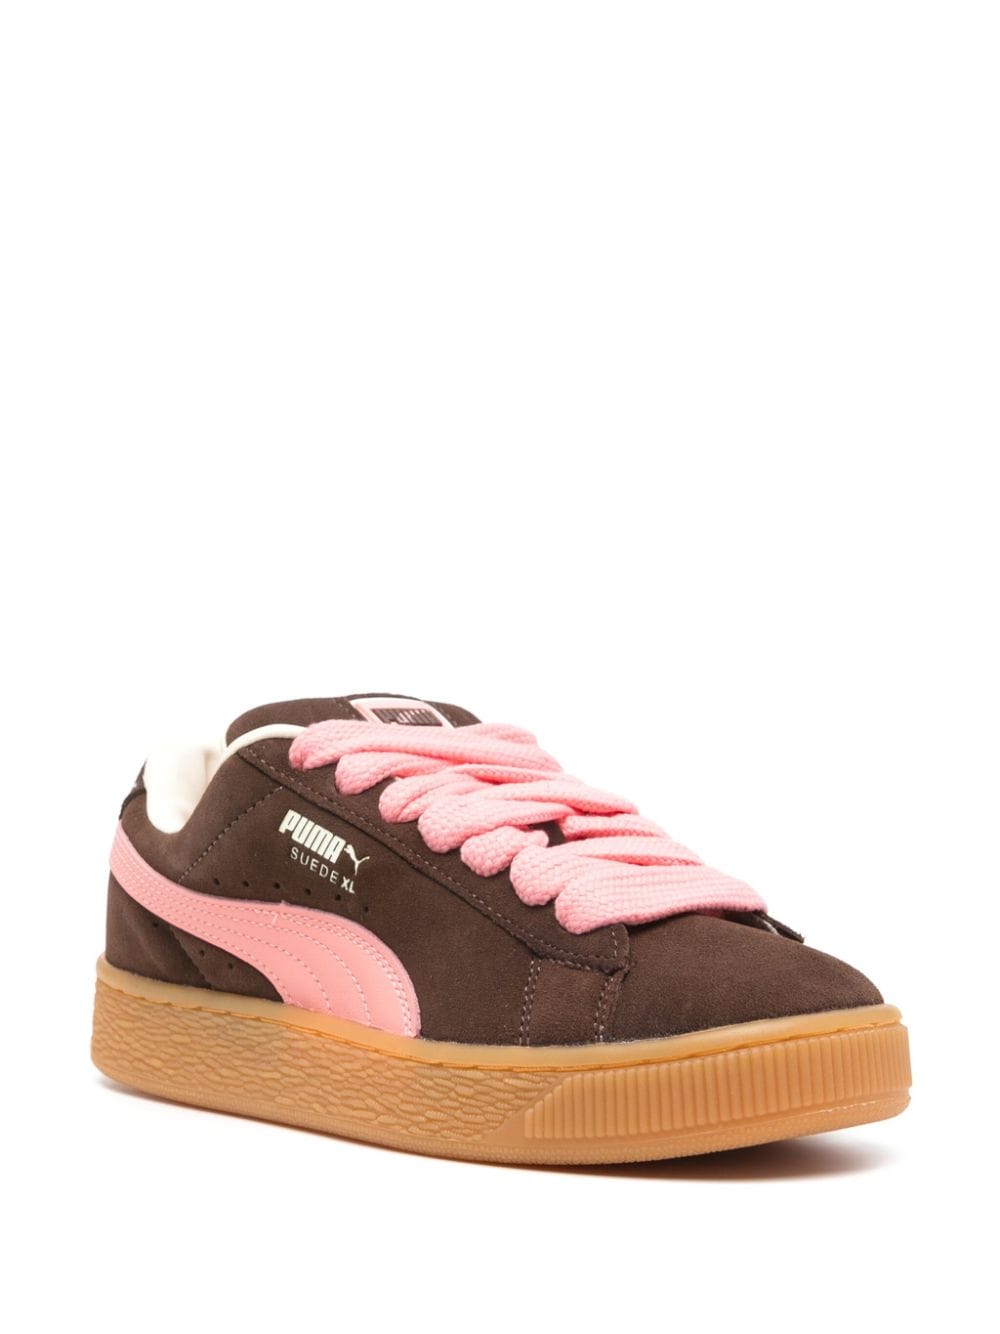 PUMA Suede XL padded sneakers - Bruin